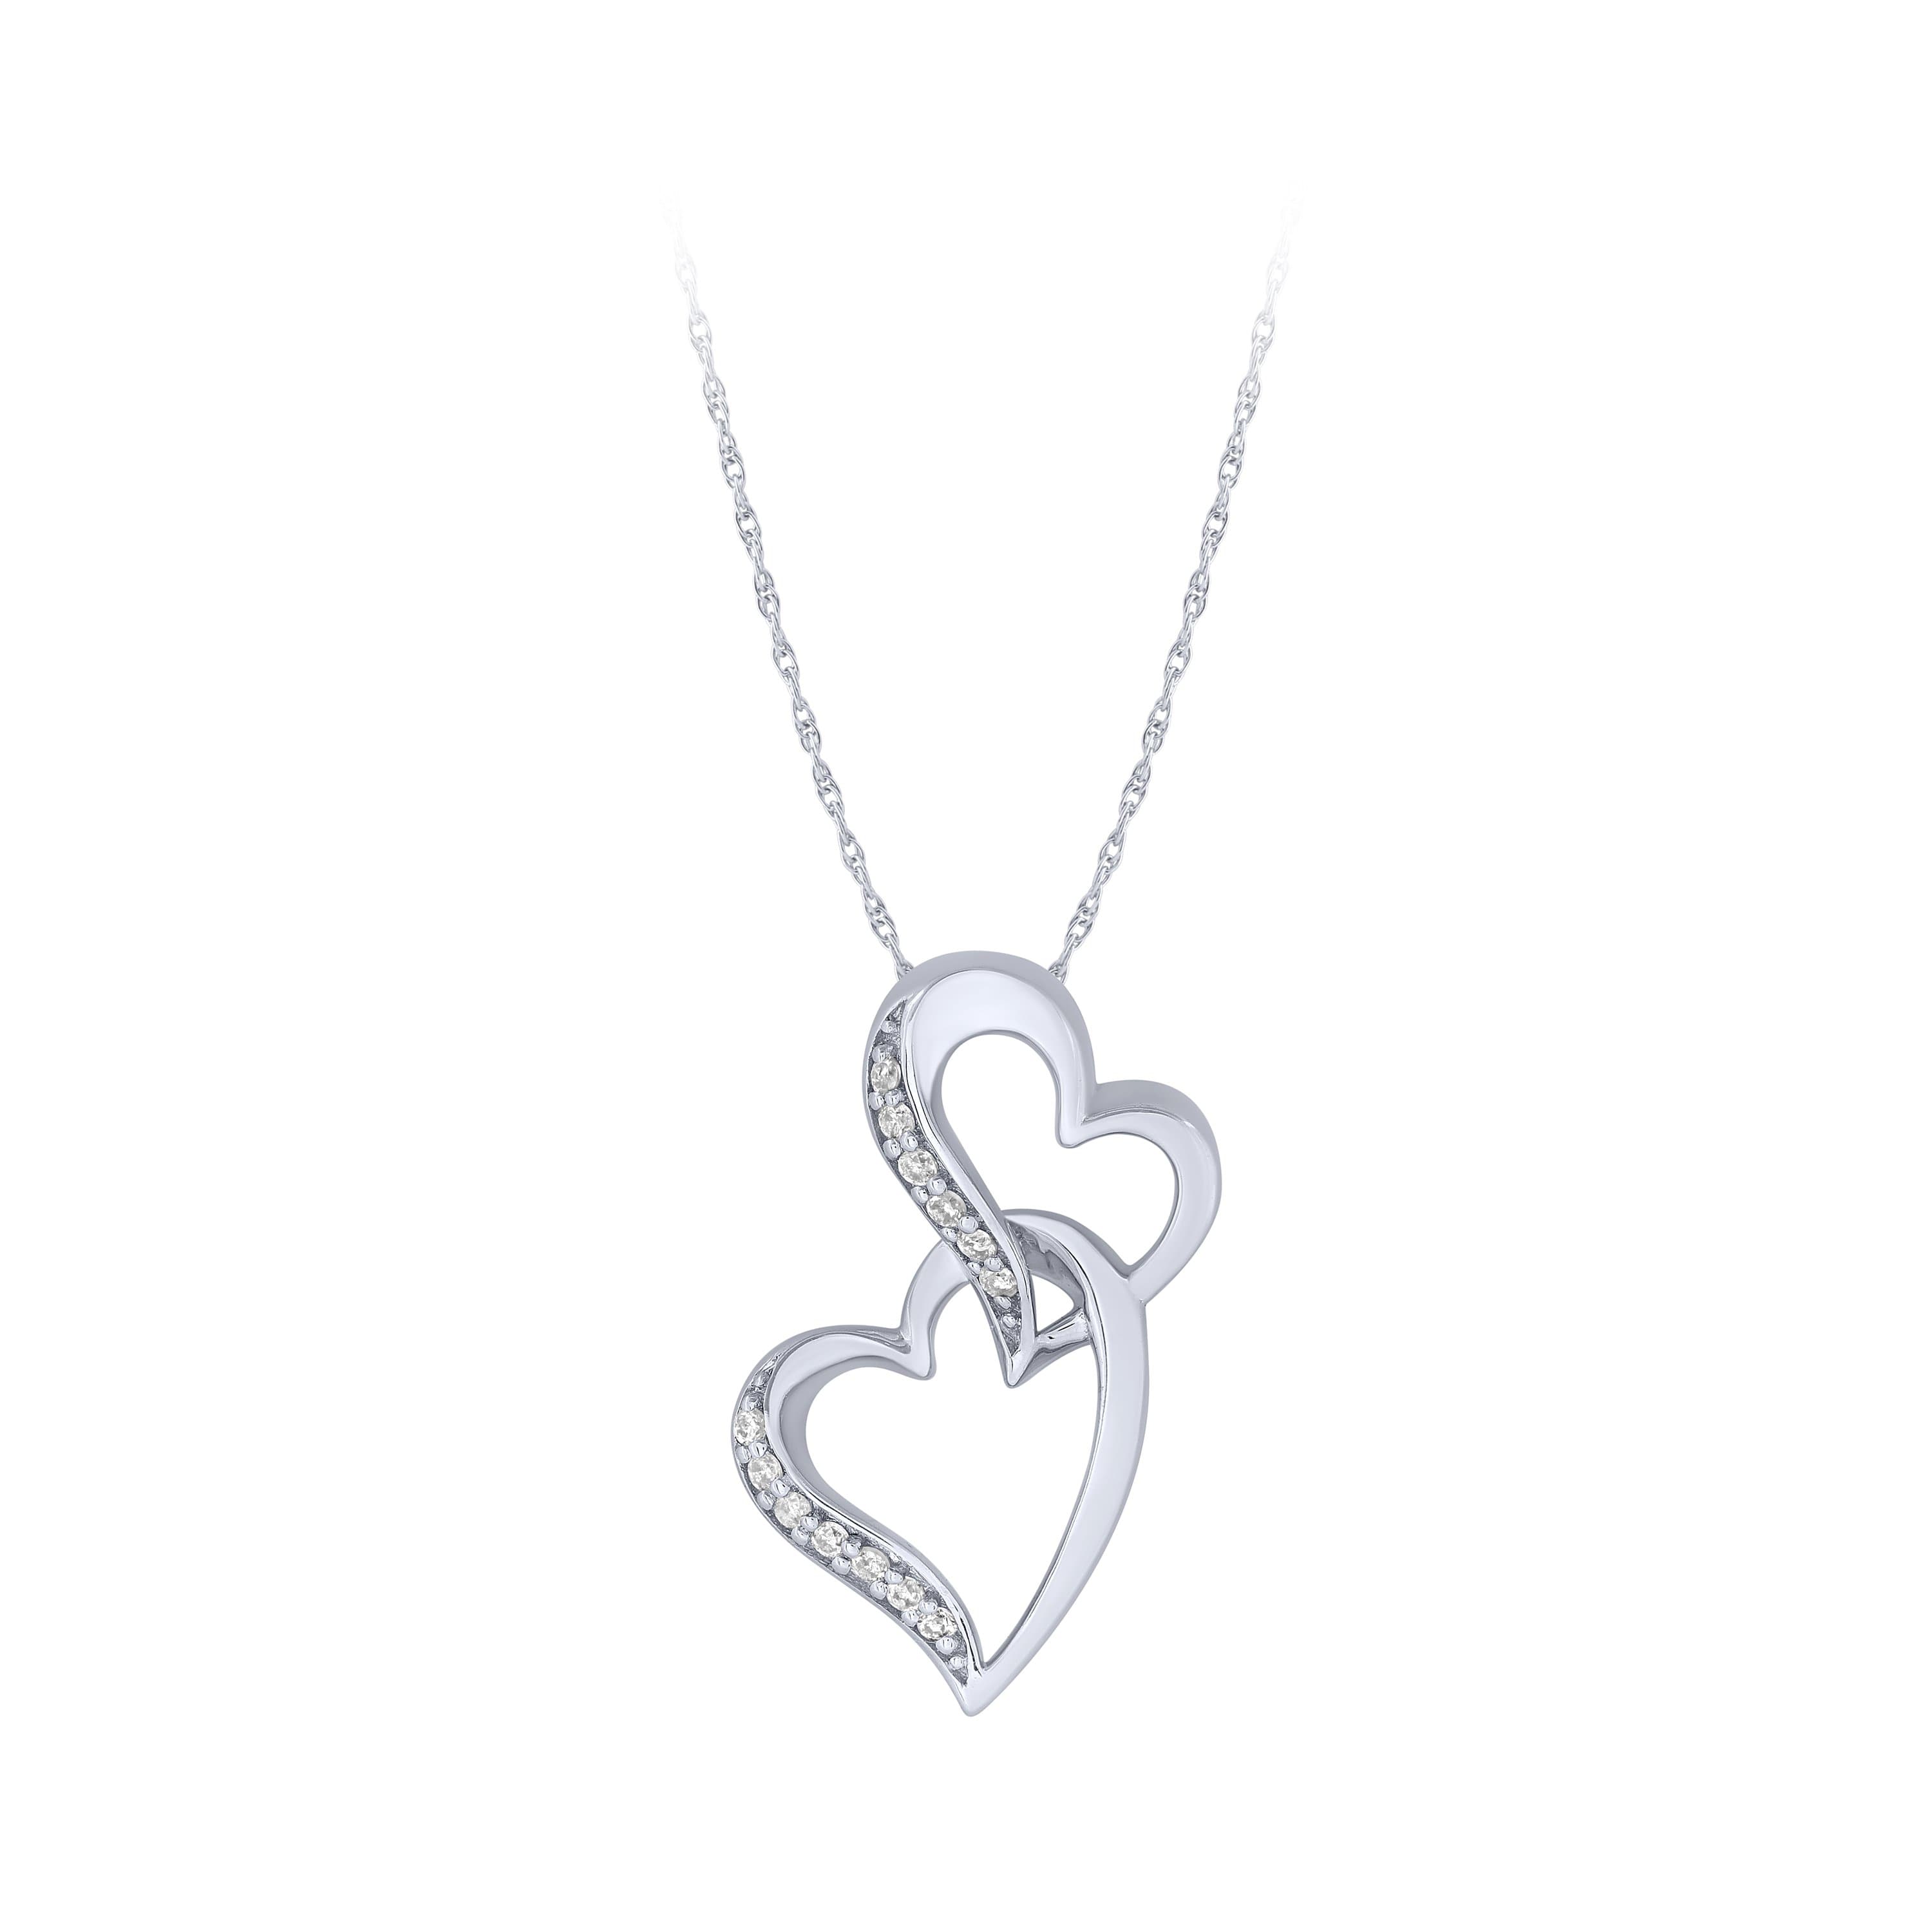 Women's Finecraft 1/4 cttw Diamond Double Heart Pendant Necklace in Gold-Plated  Sterling Silver, 18